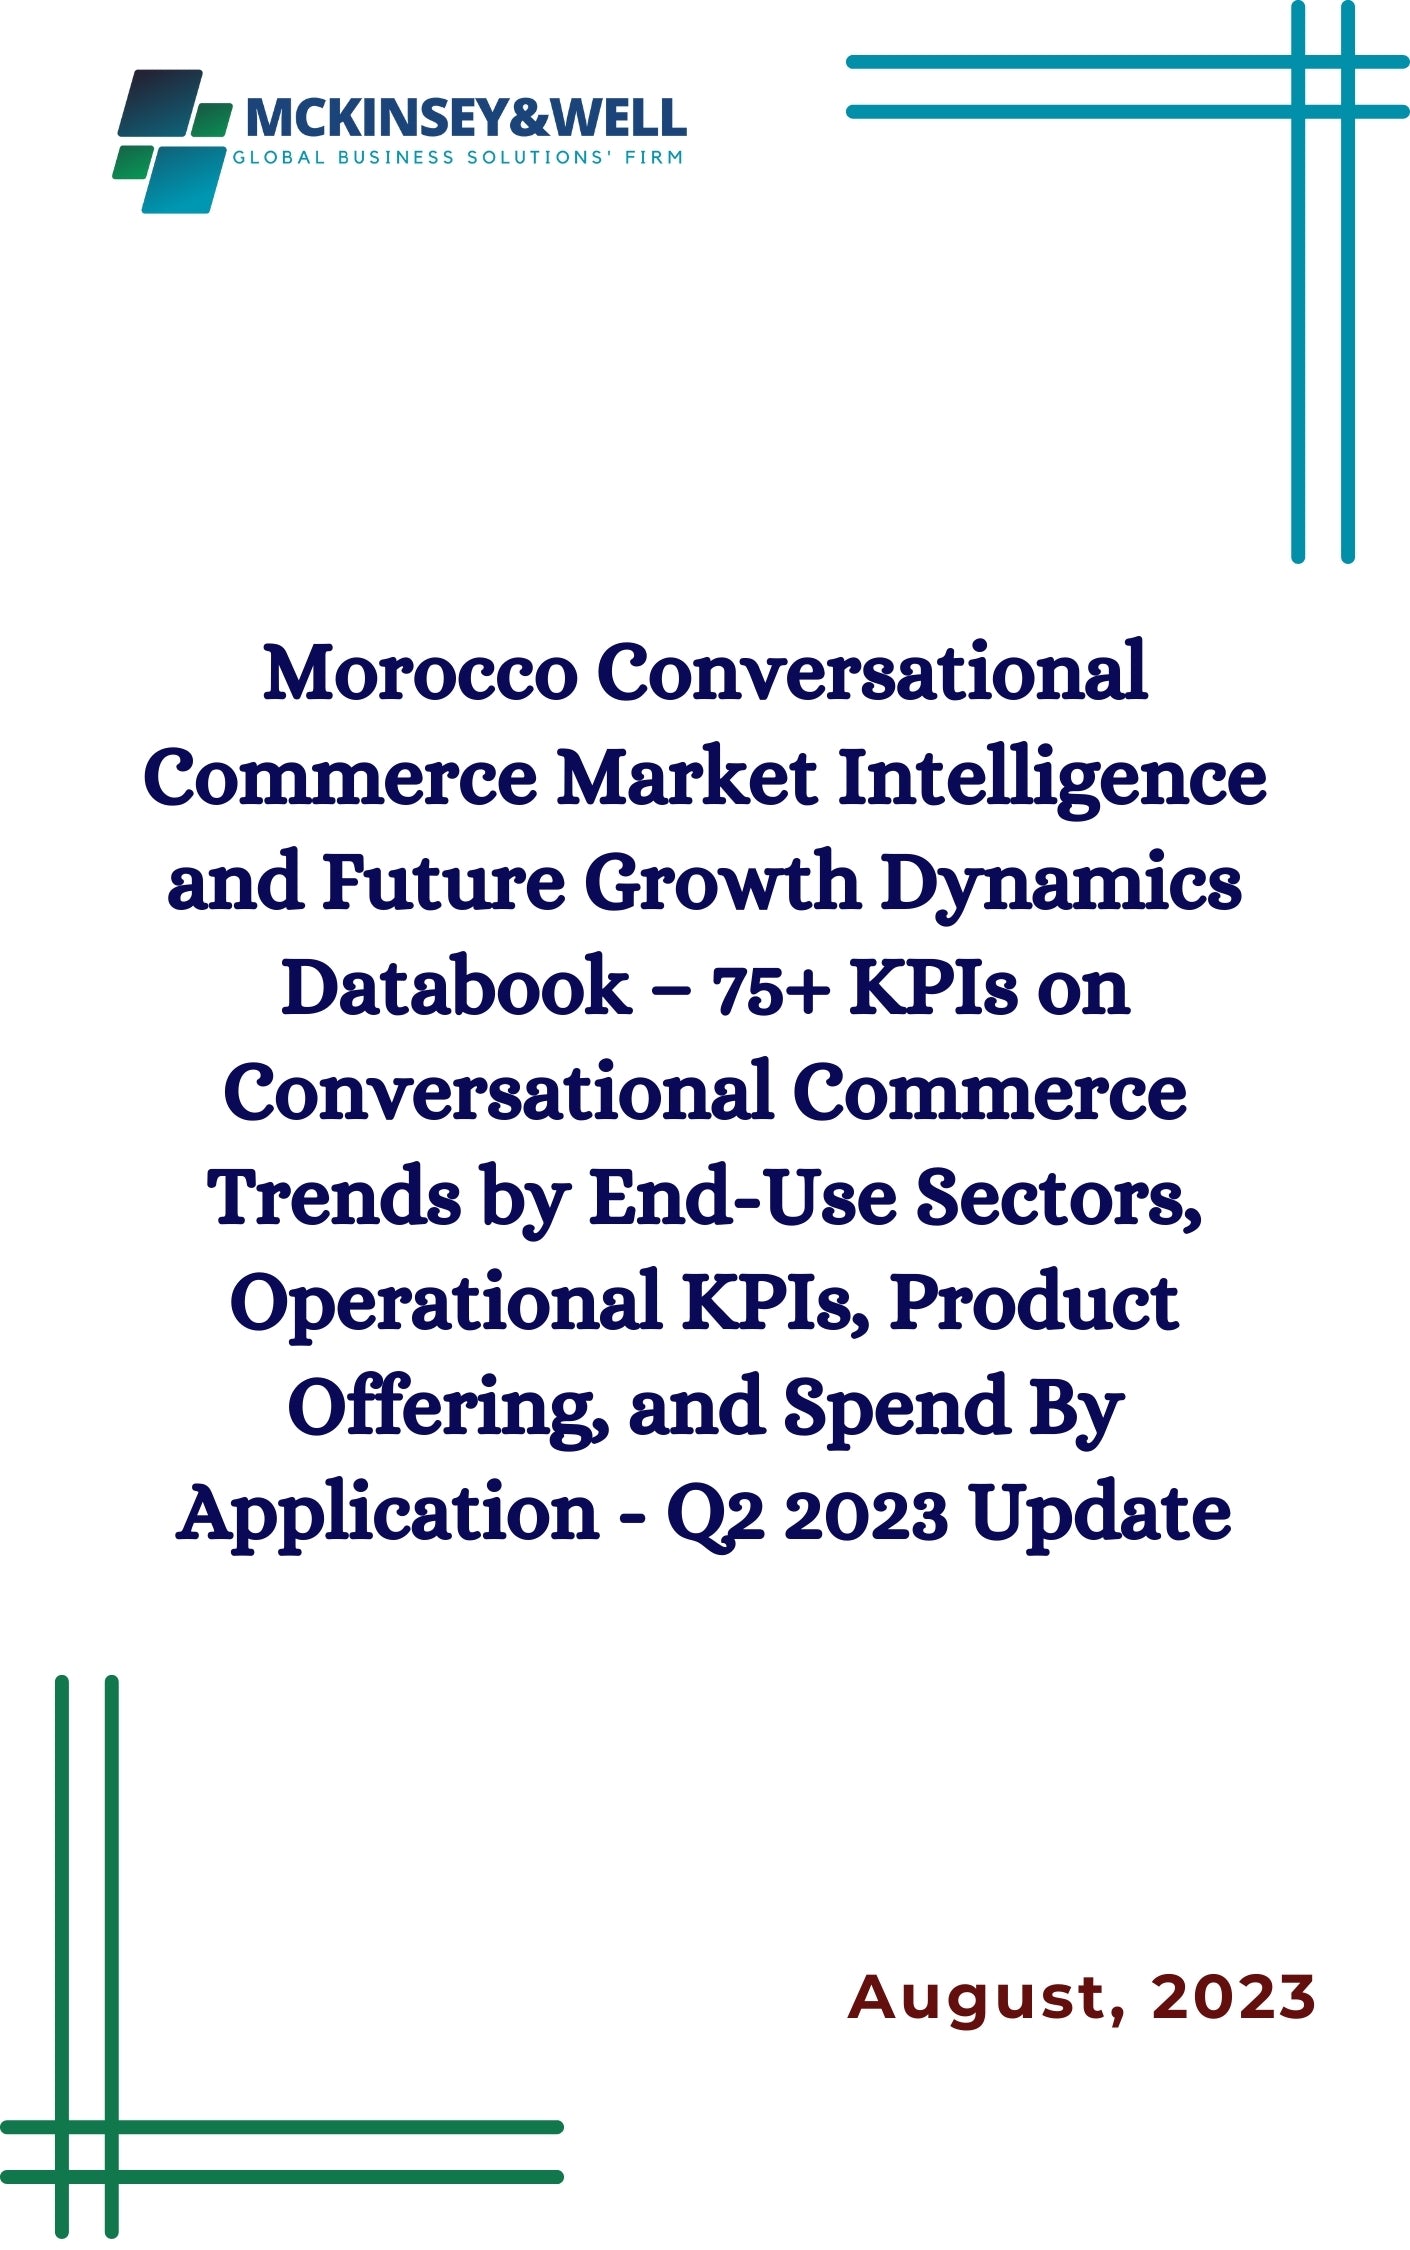 Morocco Conversational Commerce Market Intelligence and Future Growth Dynamics Databook – 75+ KPIs on Conversational Commerce Trends by End-Use Sectors, Operational KPIs, Product Offering, and Spend By Application - Q2 2023 Update